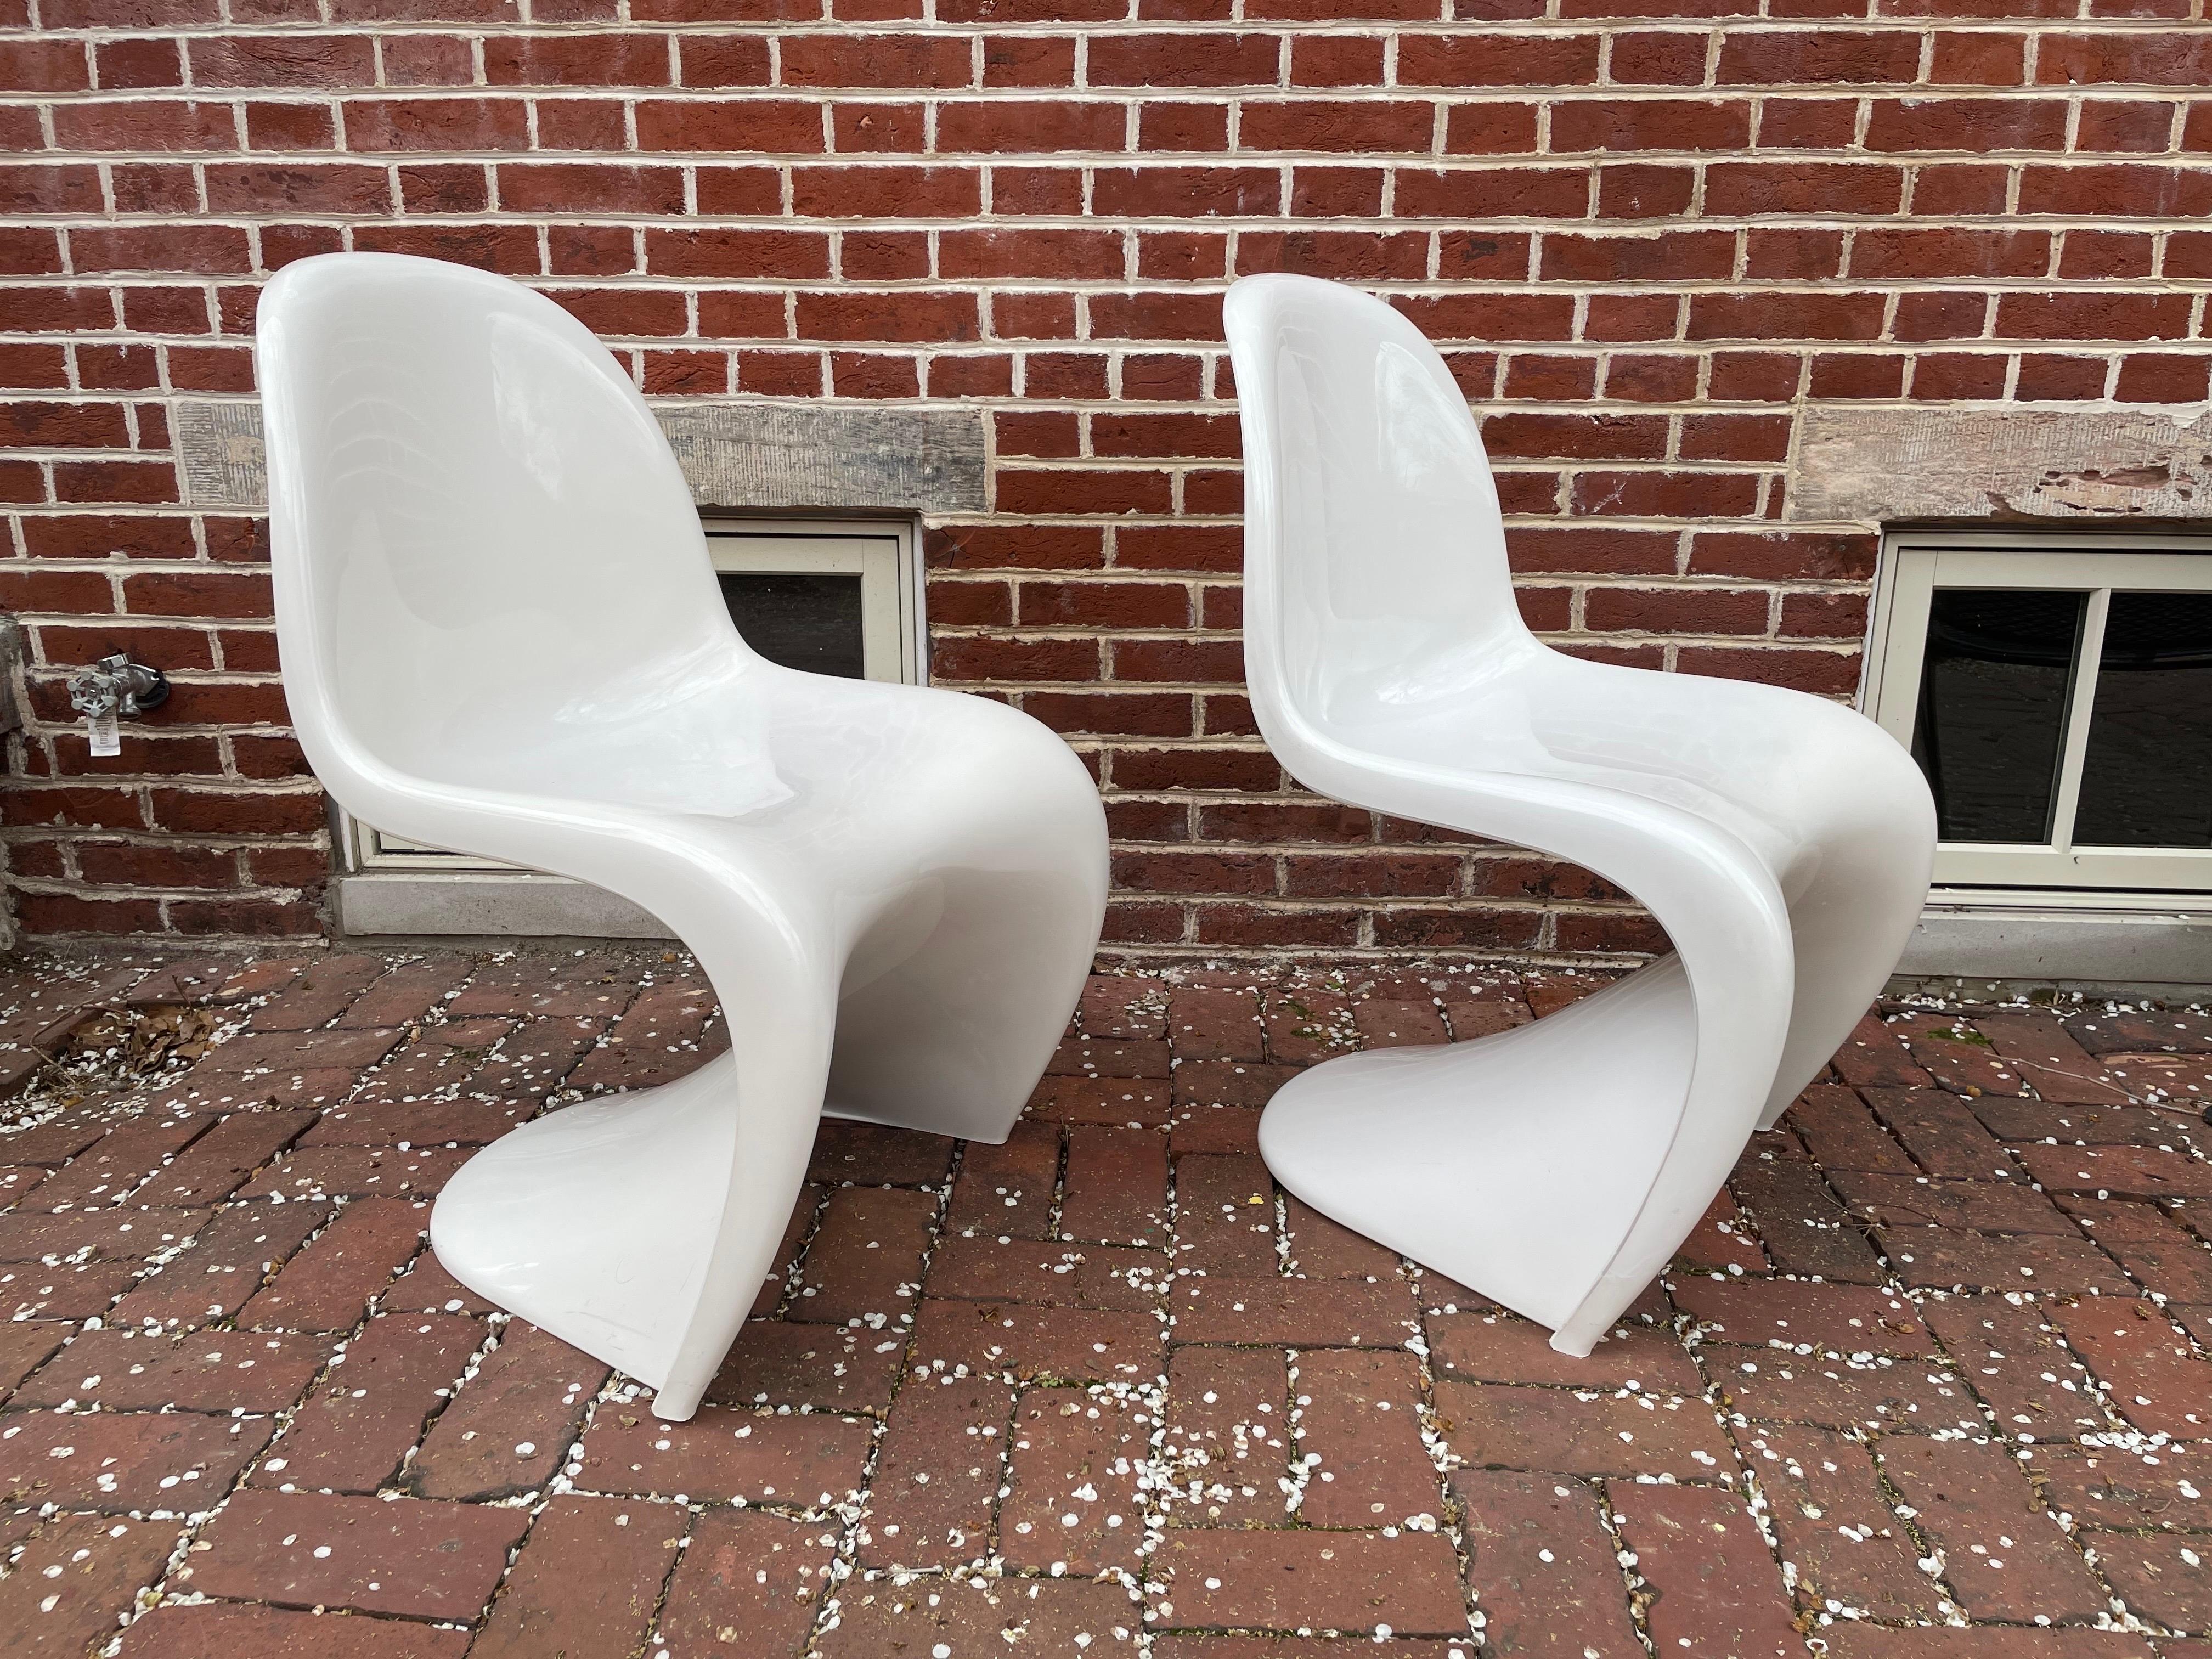 Late 20th Century 1976 Verner Panton Herman Miller European Production S-Chairs - a Pair For Sale